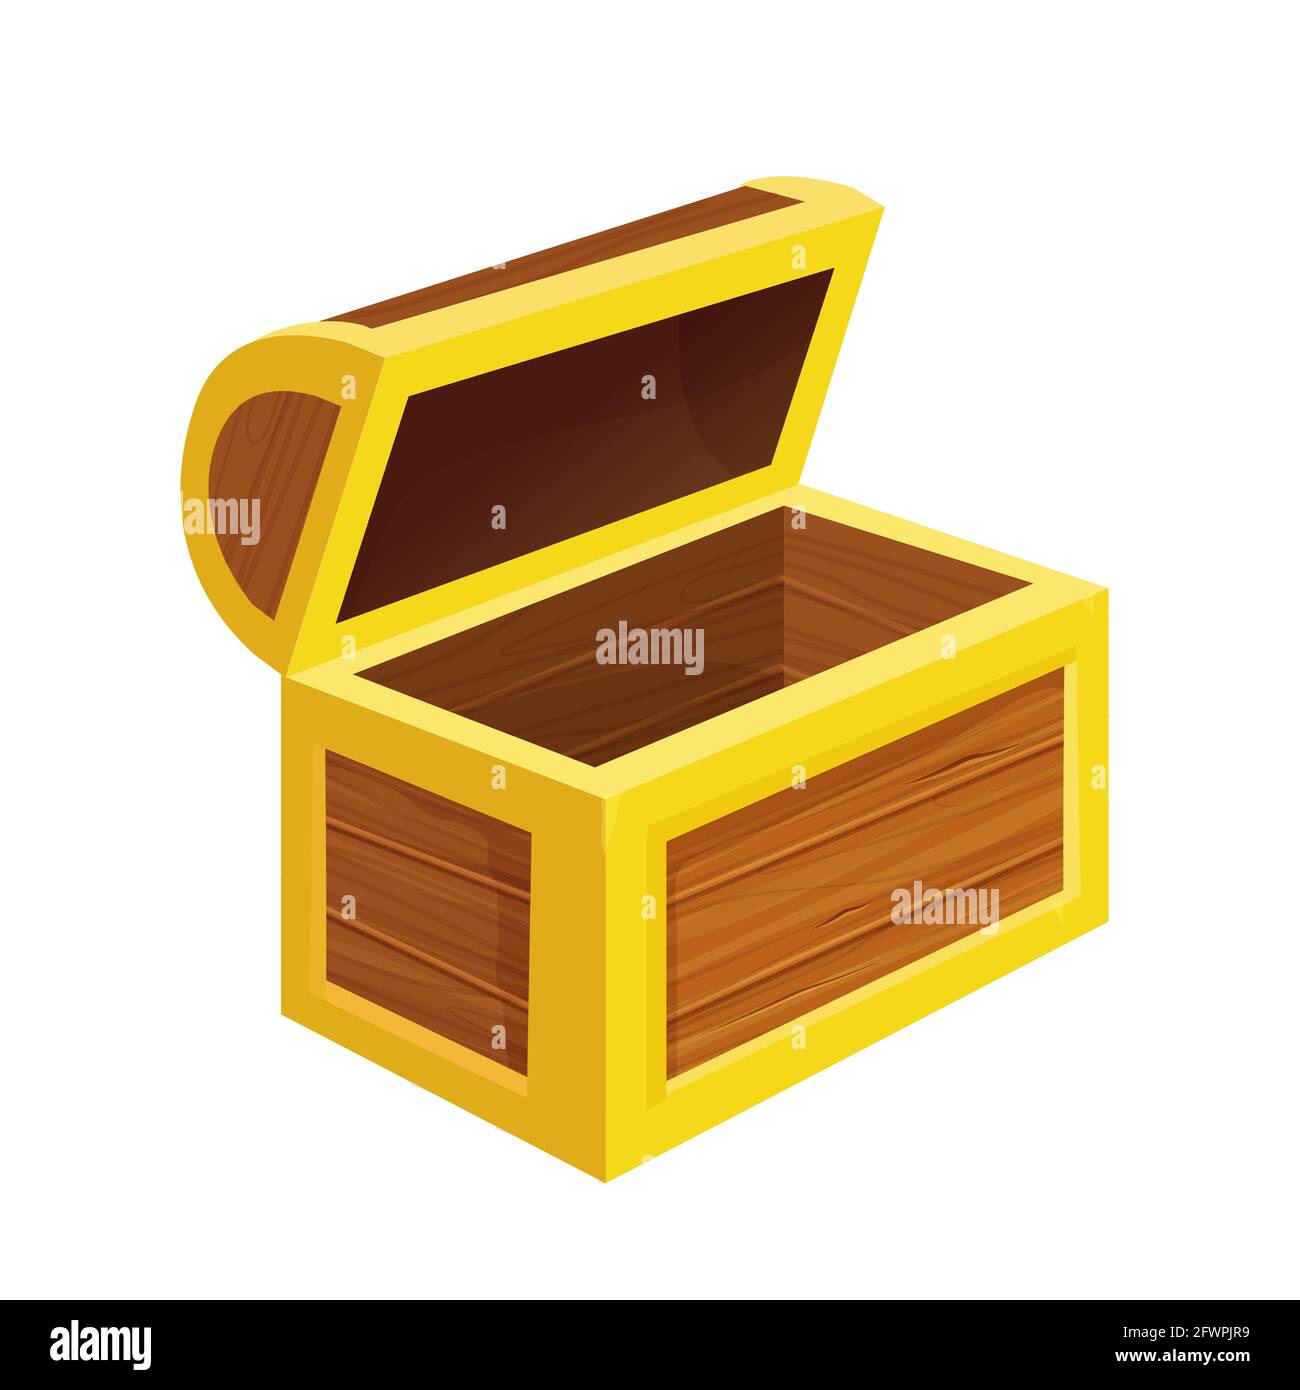 Ancient gold coins in heavy open wooden chest Vector Image